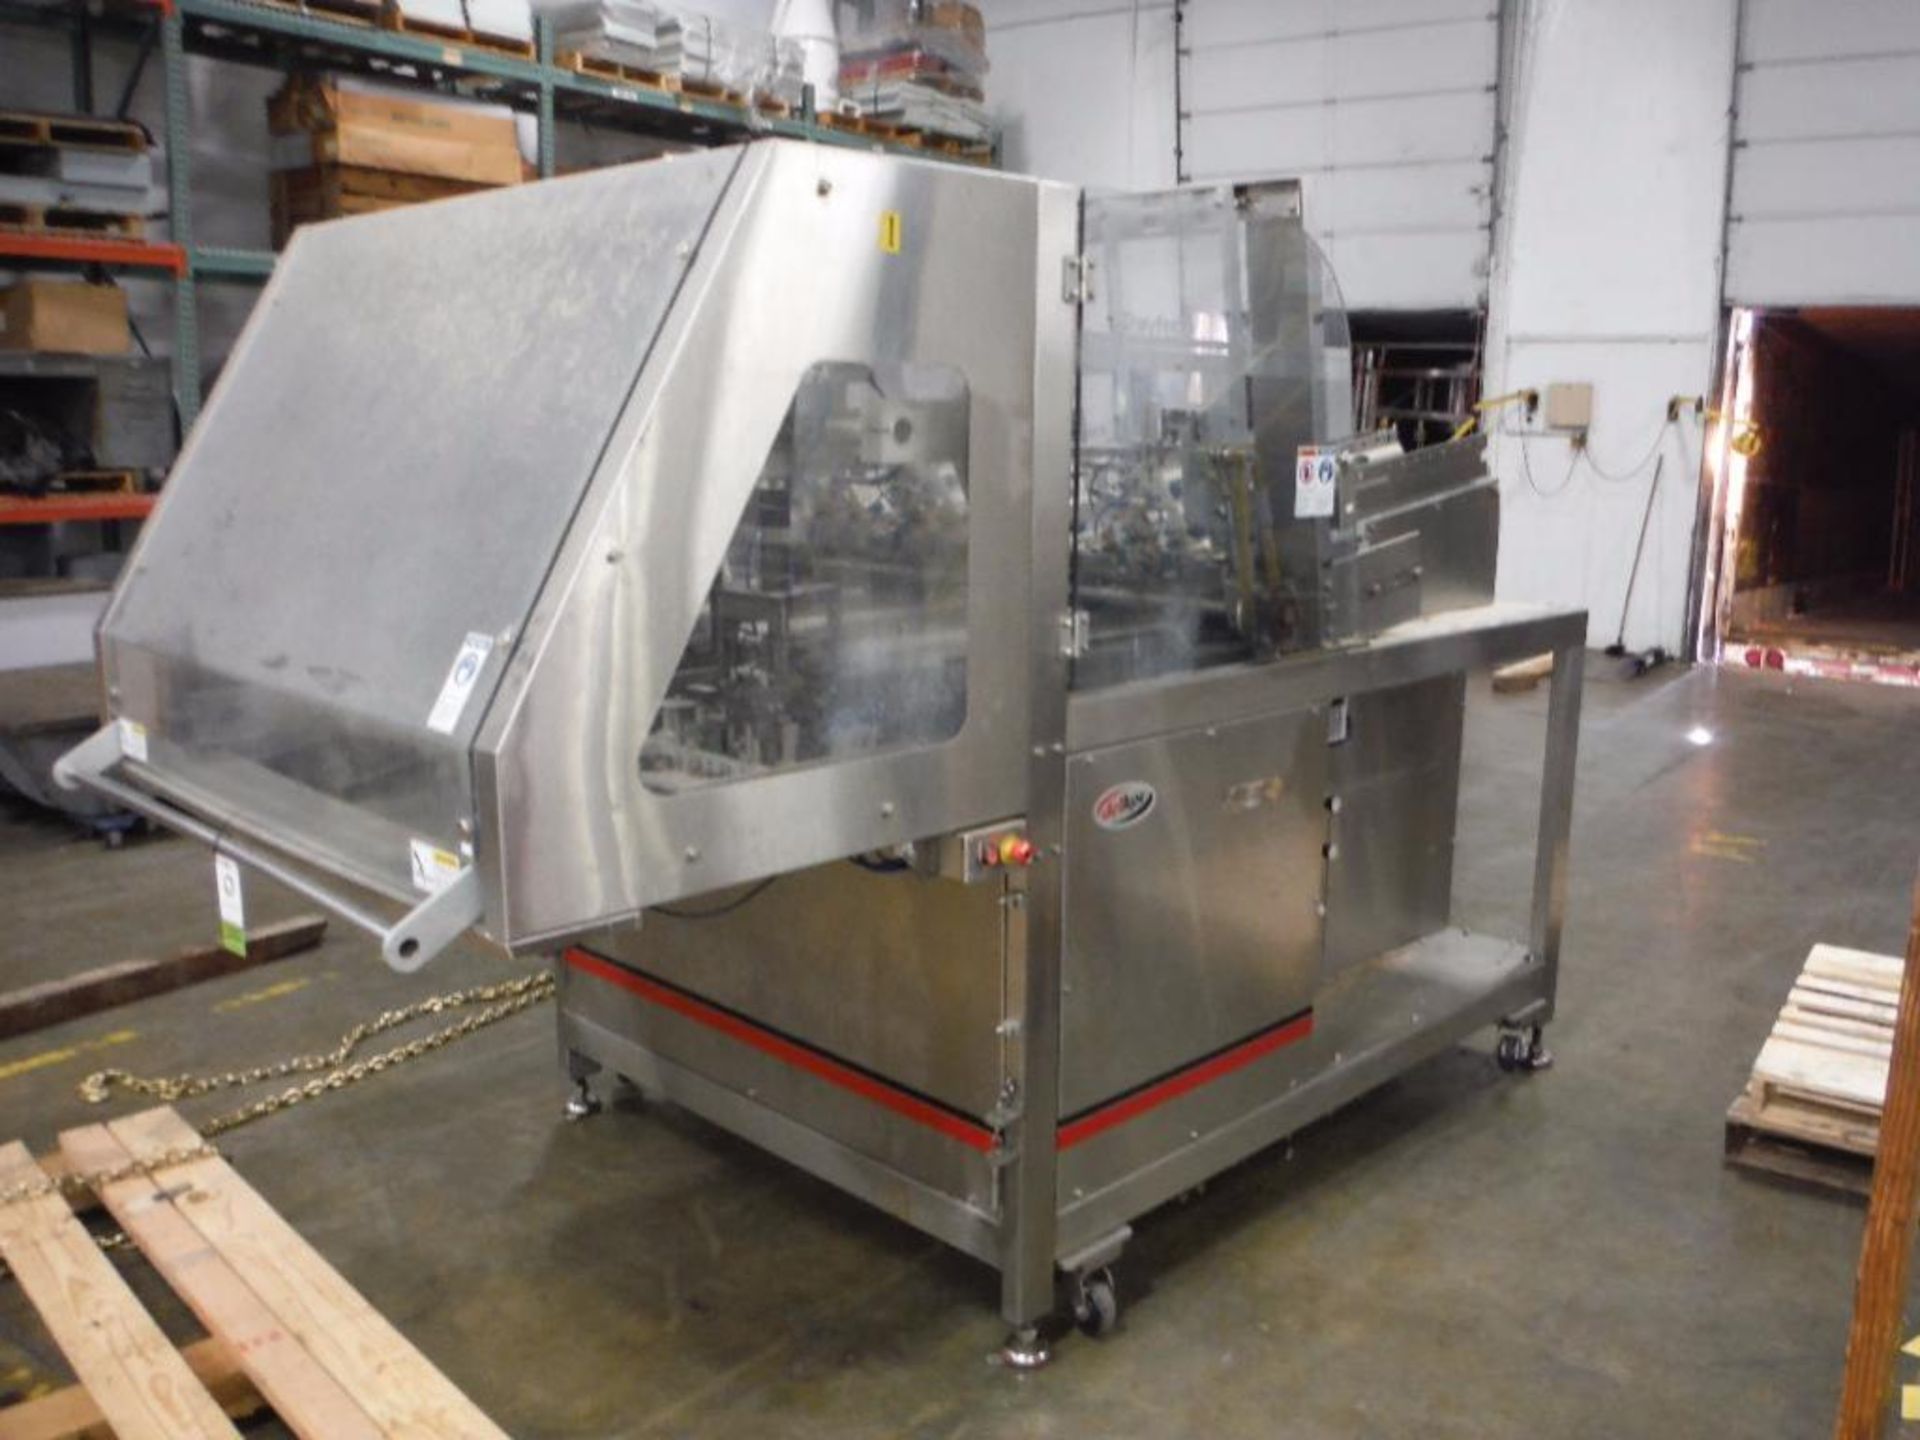 Delkor trayfecta 4 lane tray former, Model TF-1504SS, SN SP-2432, AB panelview plus 700, AB powerfle - Image 2 of 18